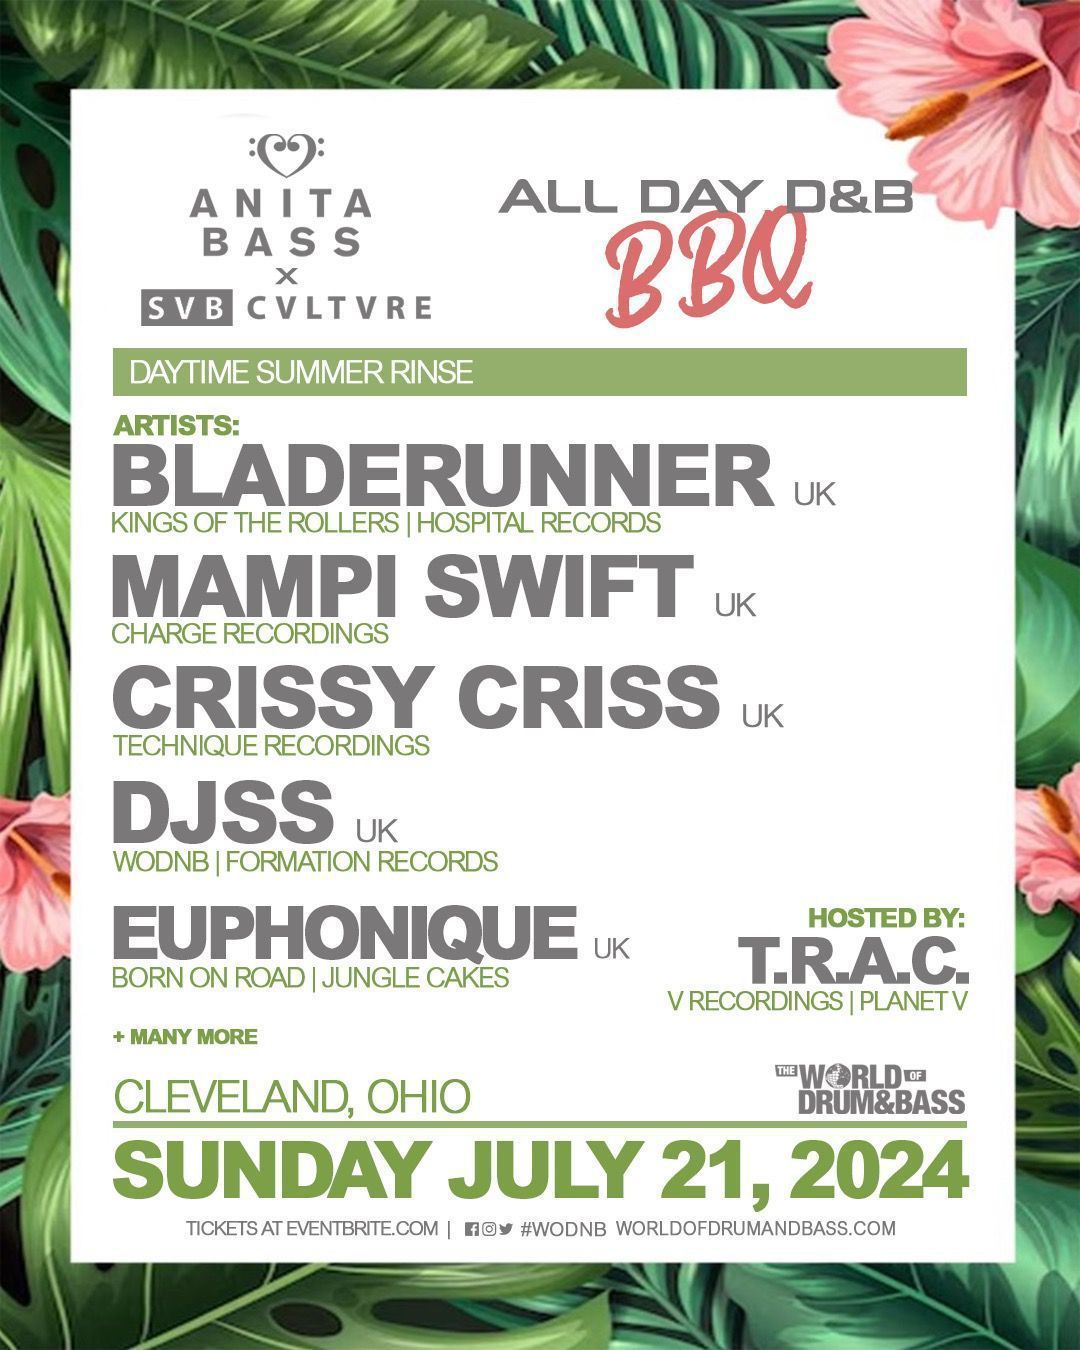 All Day D&B BBQ - Cleveland 